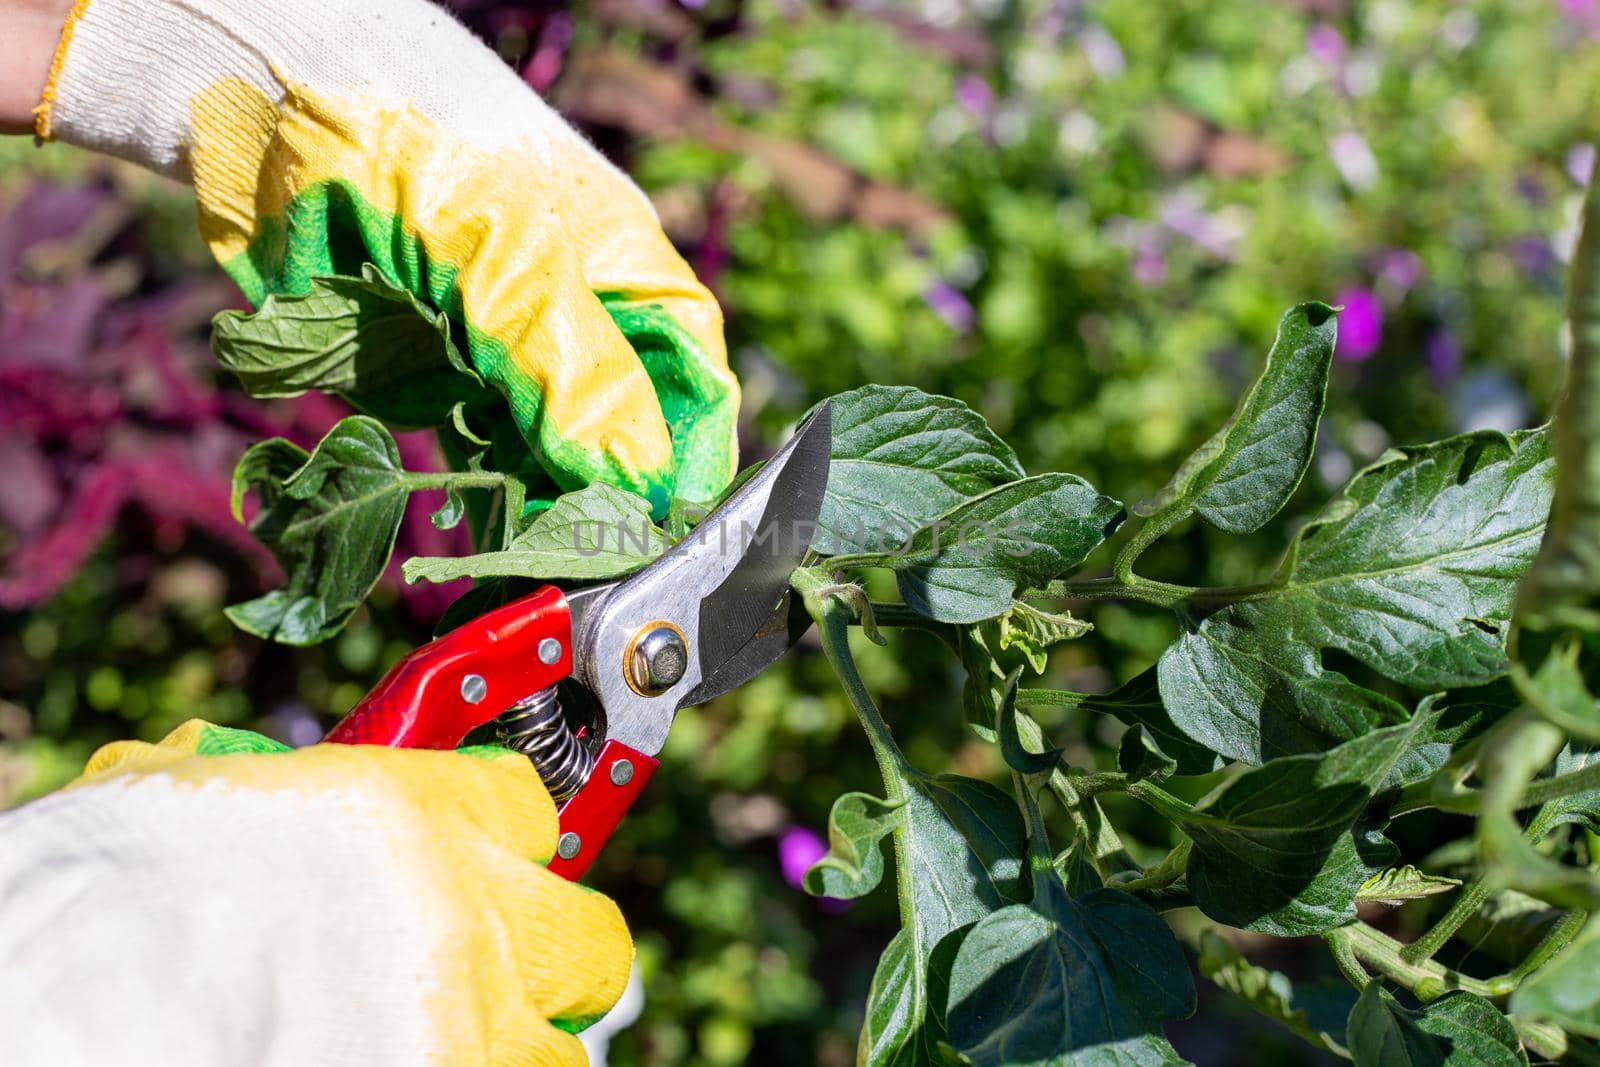 Pruning tomato bushes with pruning shears. Growing and caring for garden vegetables by levnat09